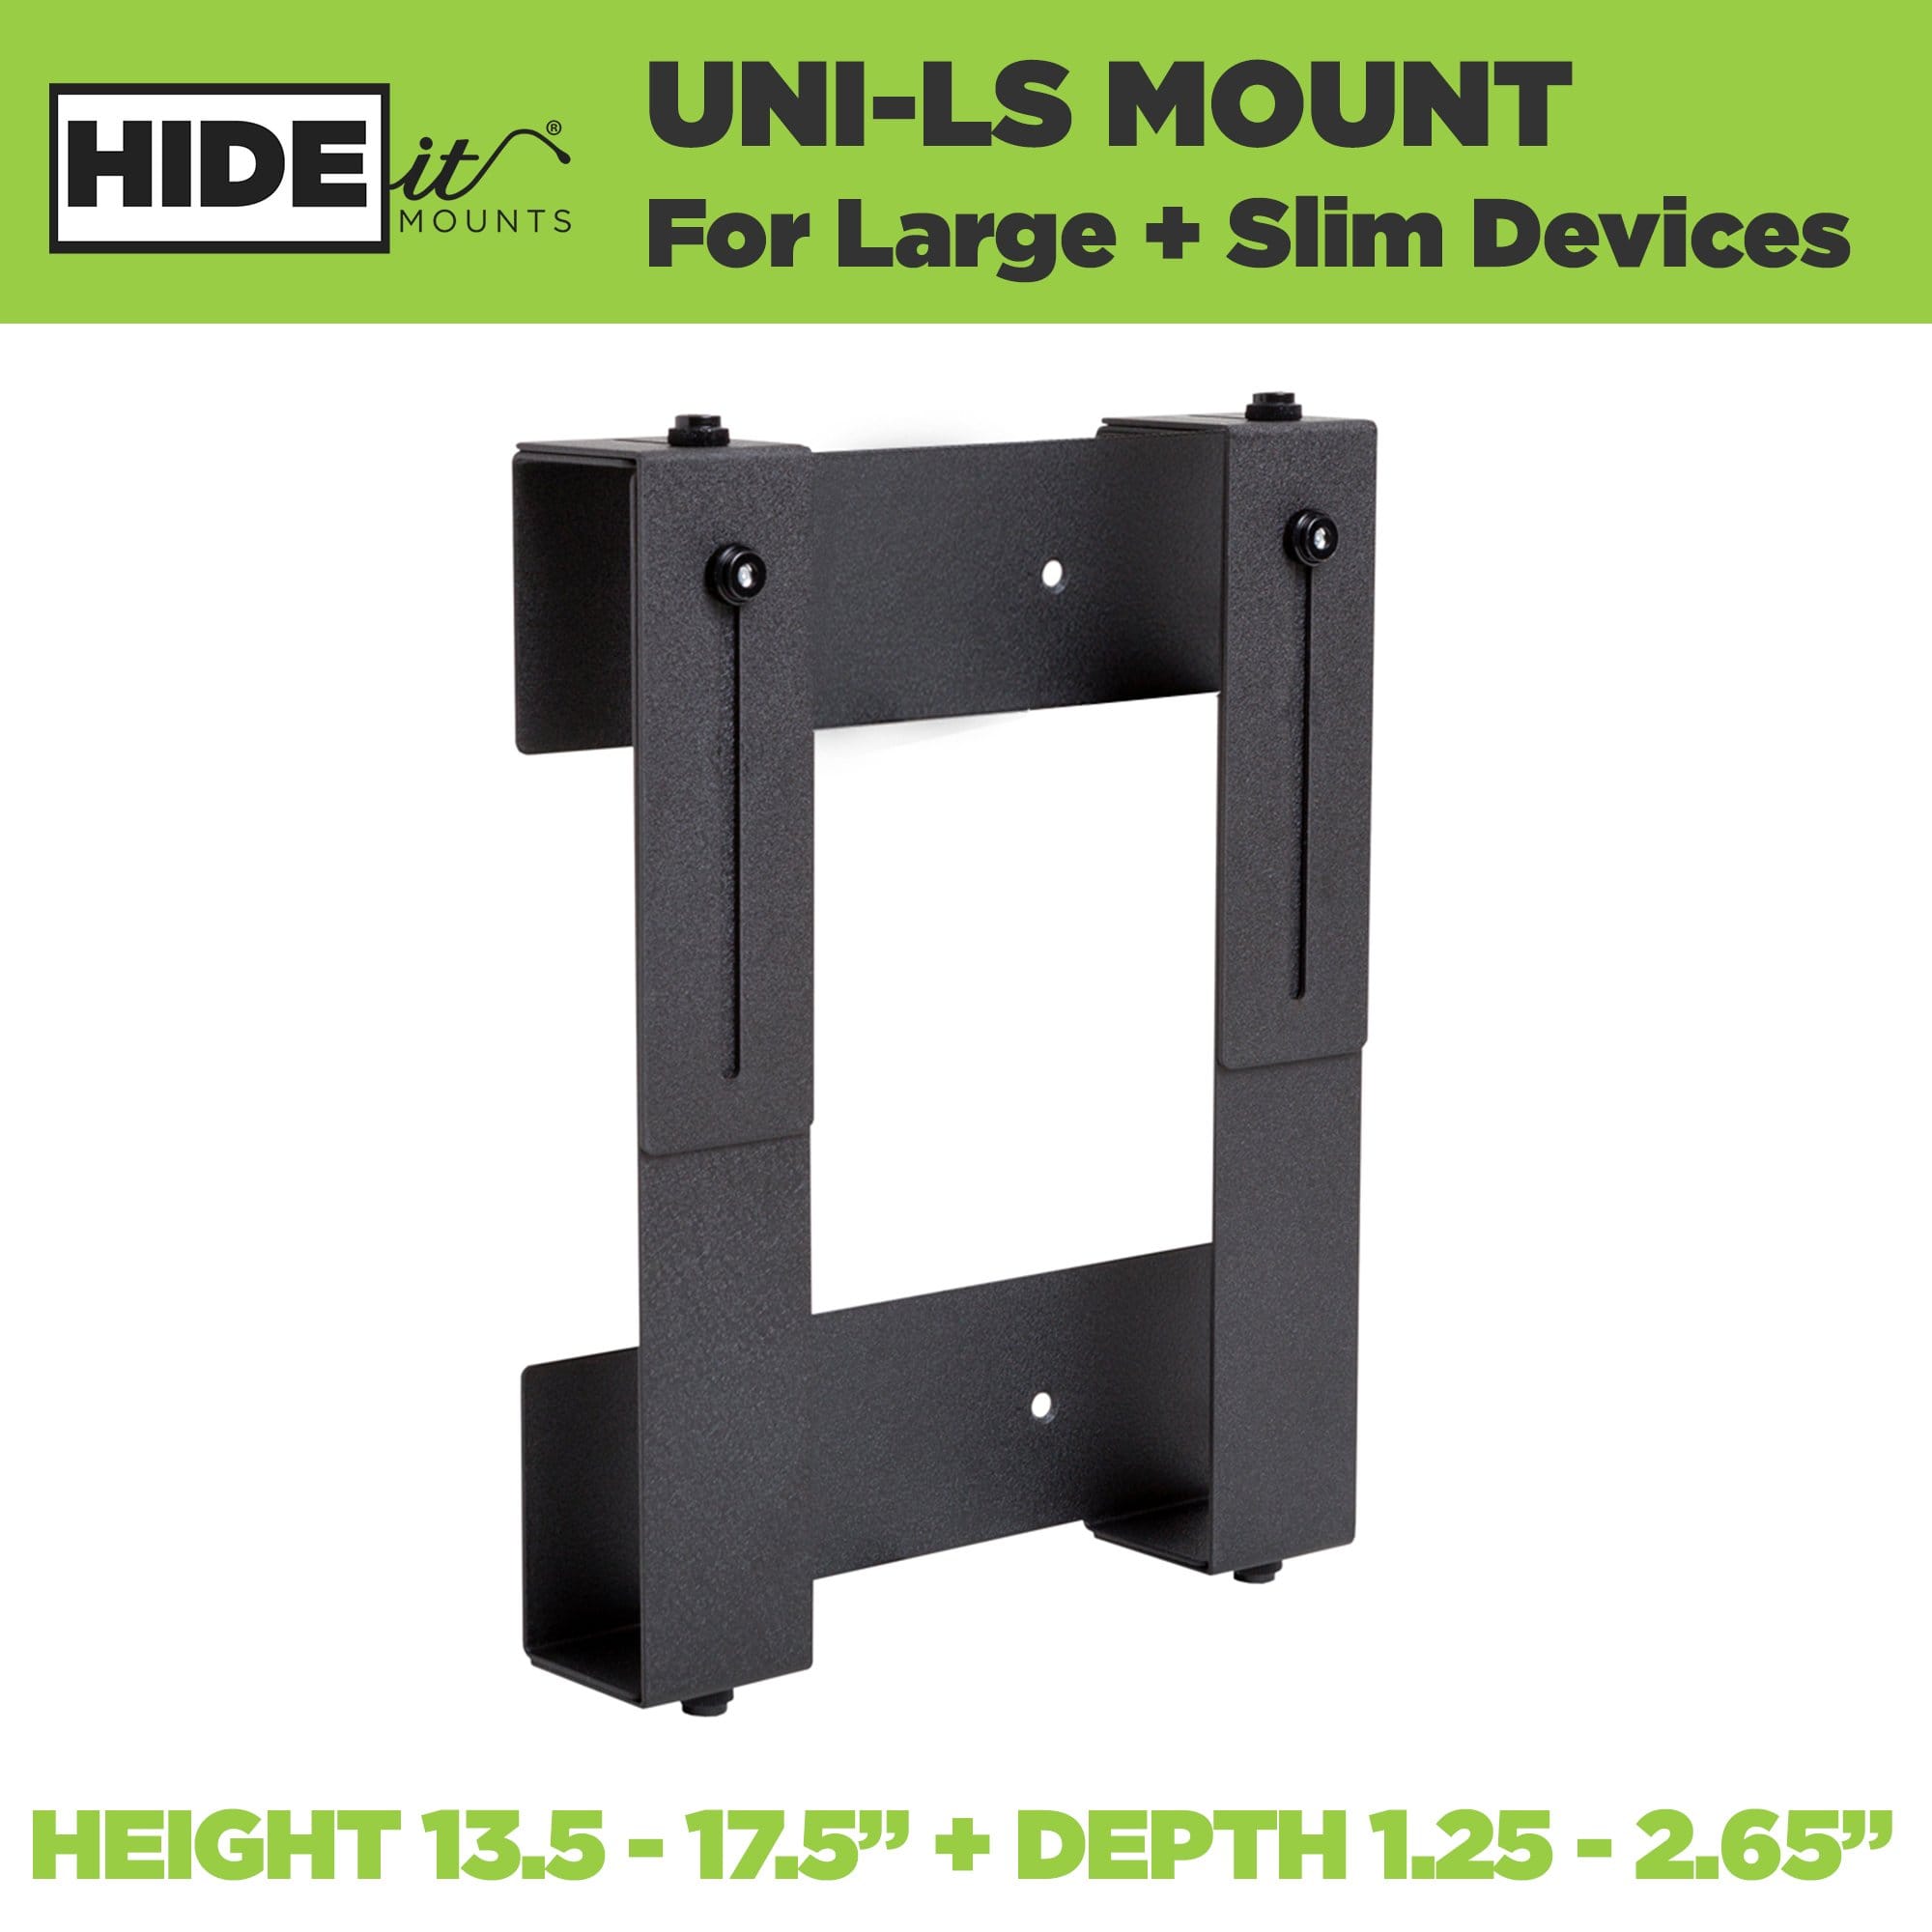 HIDEit Uni-L Mount. Adjustable height 13.5-17.5” and depth 1.5-2.75" A mount for a cable box